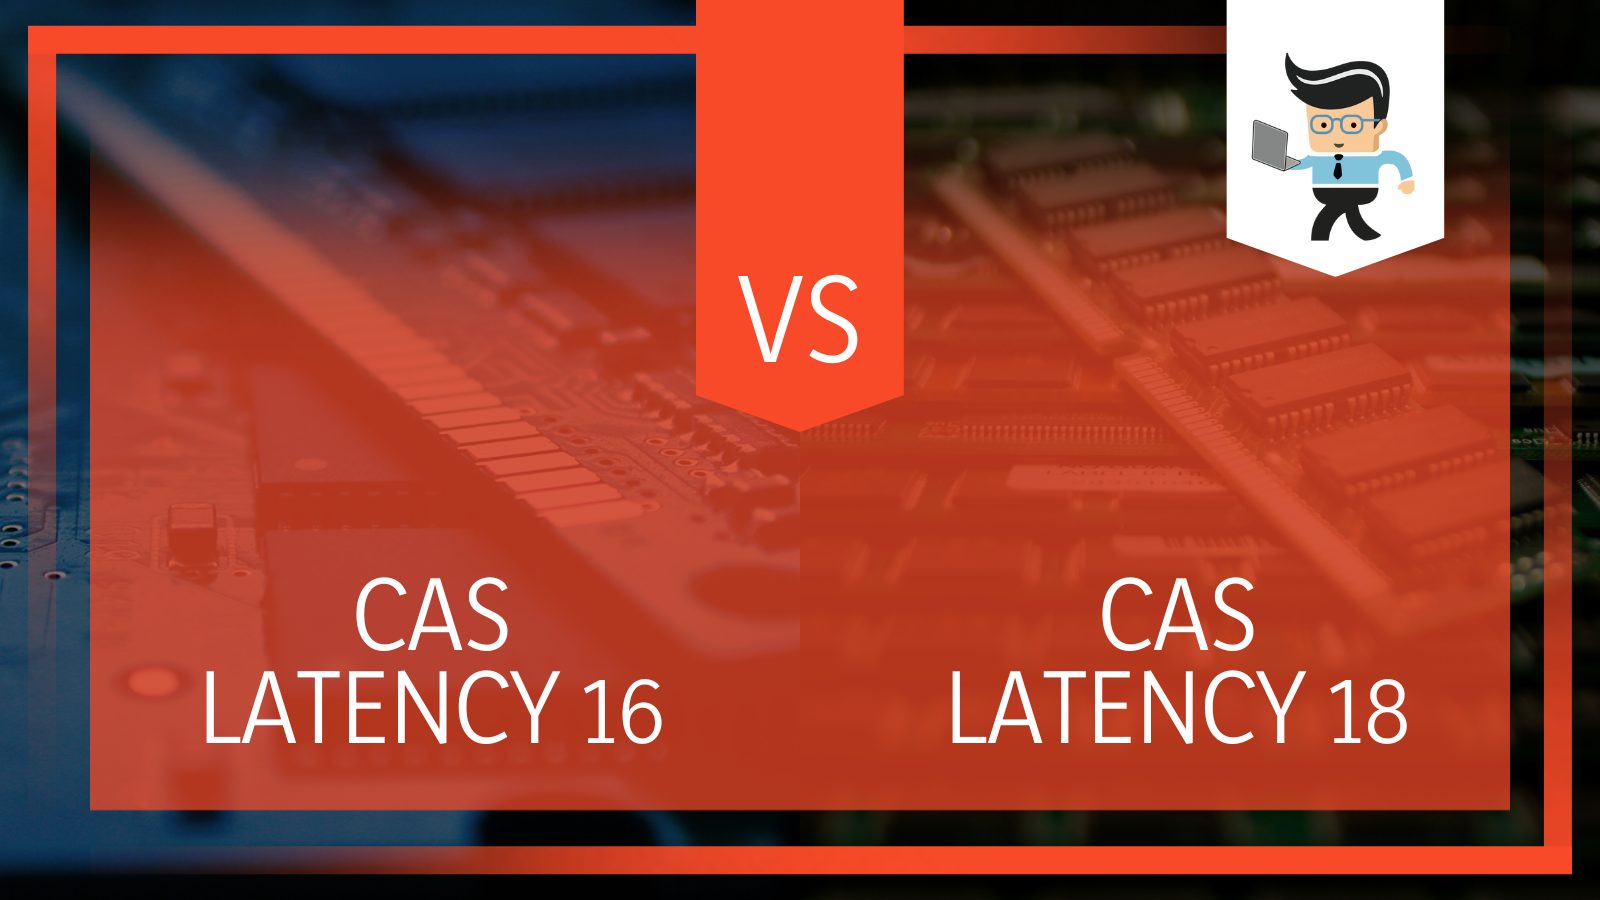 CAS latency 16 vs 18 Difference